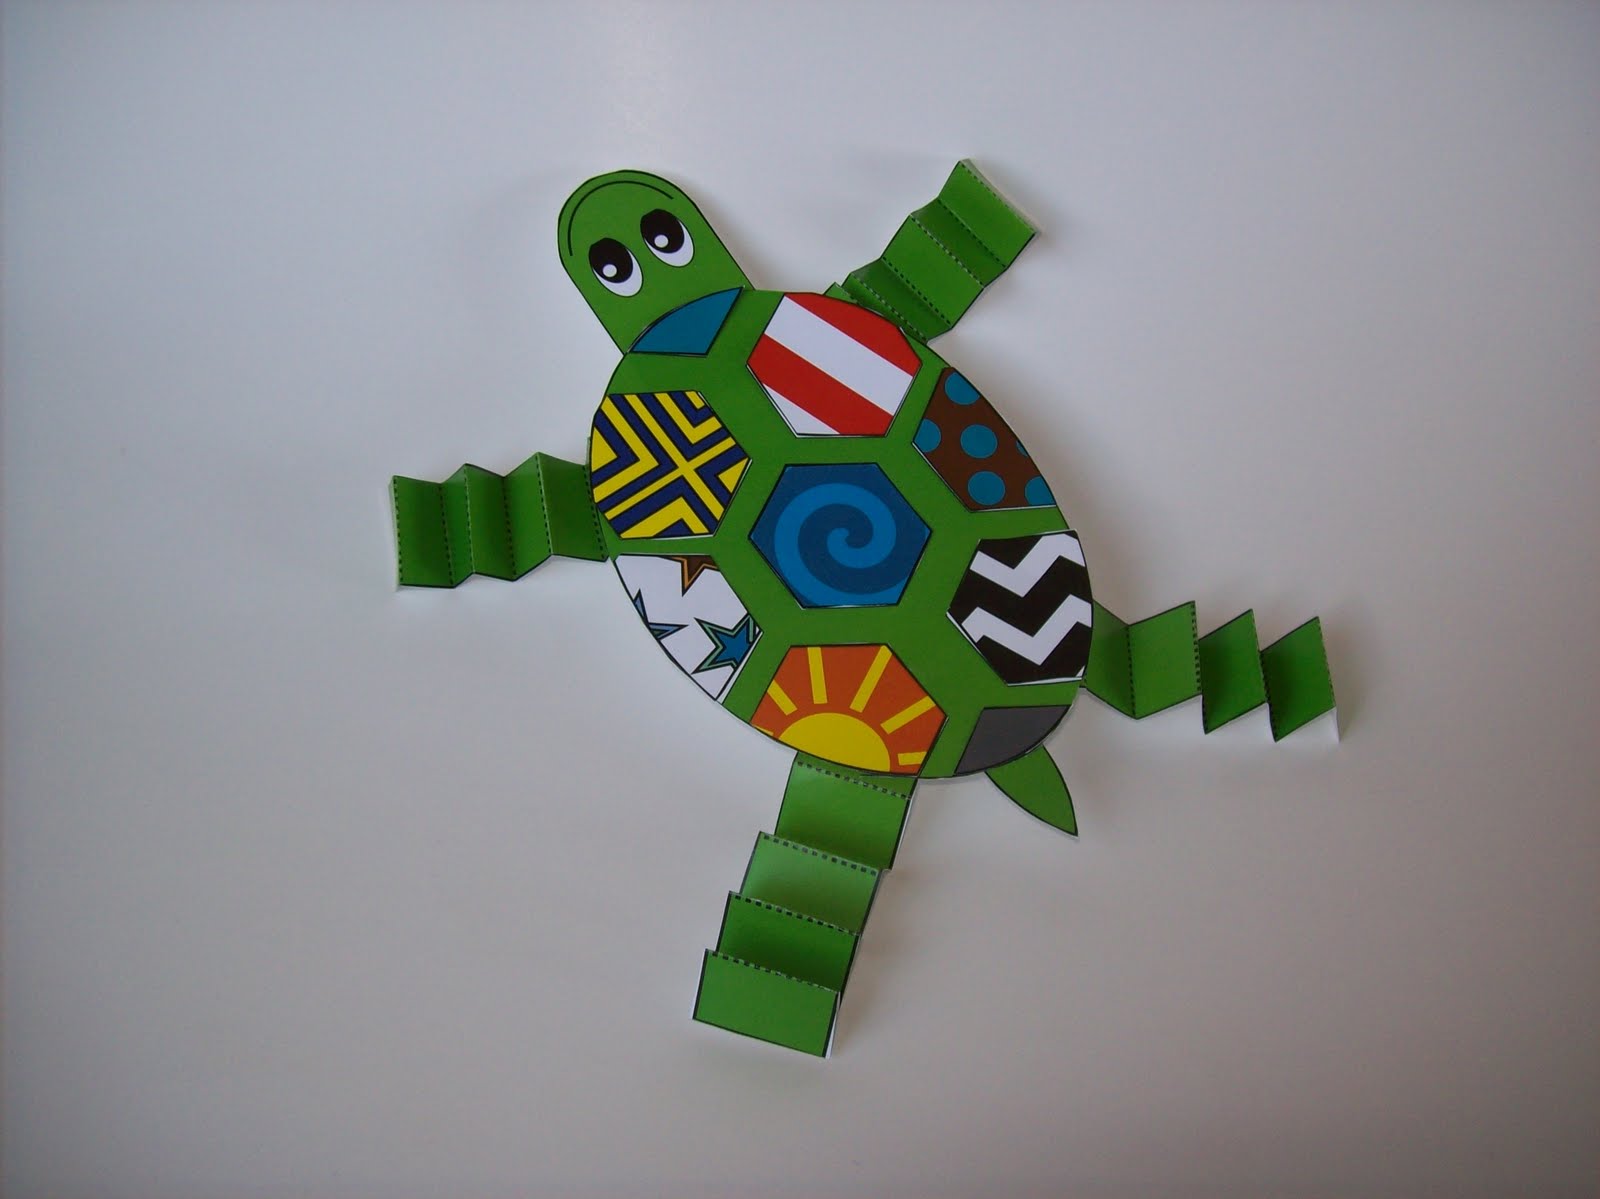 Smarty Pants Fun Printables: My newest project-free printable Turtle